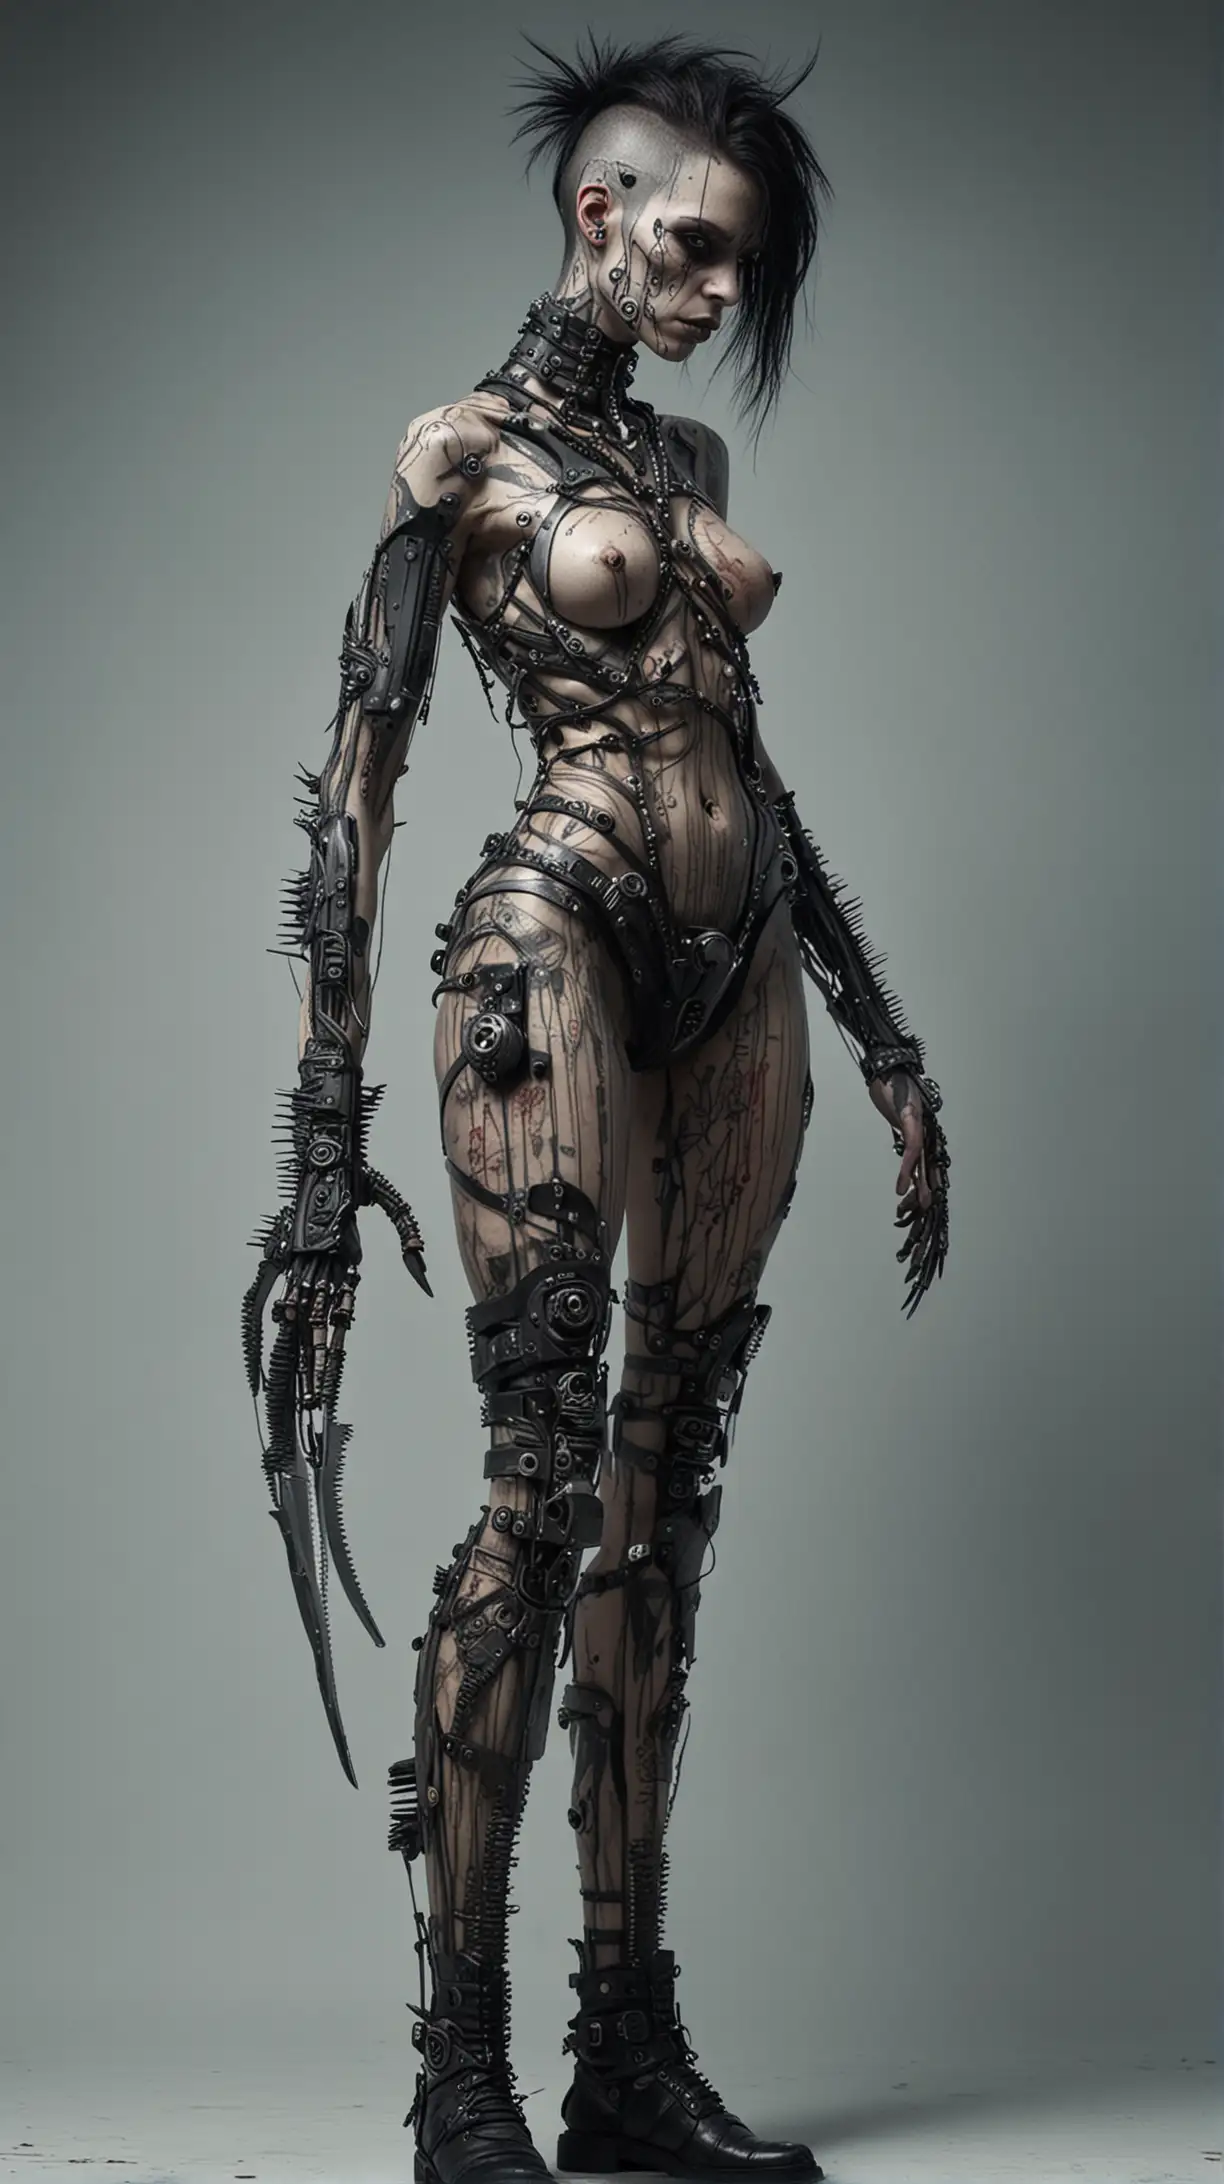 Androgynous cyberpunk man, grotesque body modifications, scary in appearance, a monstrosity, body horror, blades for legs, buzz saw arm